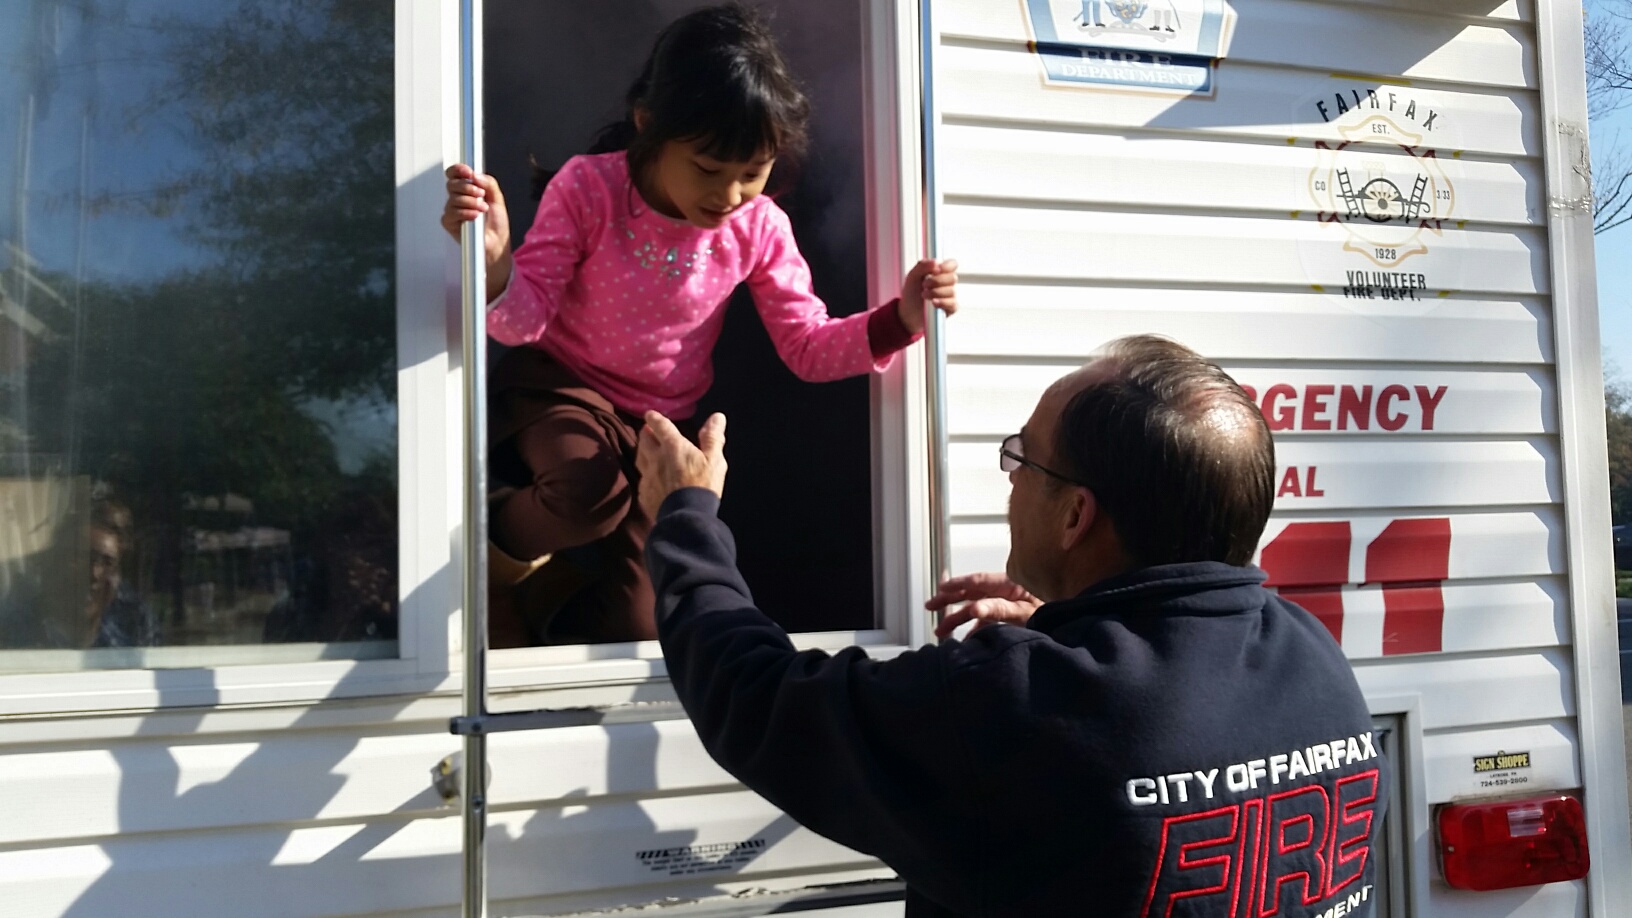 The Life Safety Trailer brings fire simulations, safety tips to Fairfax families